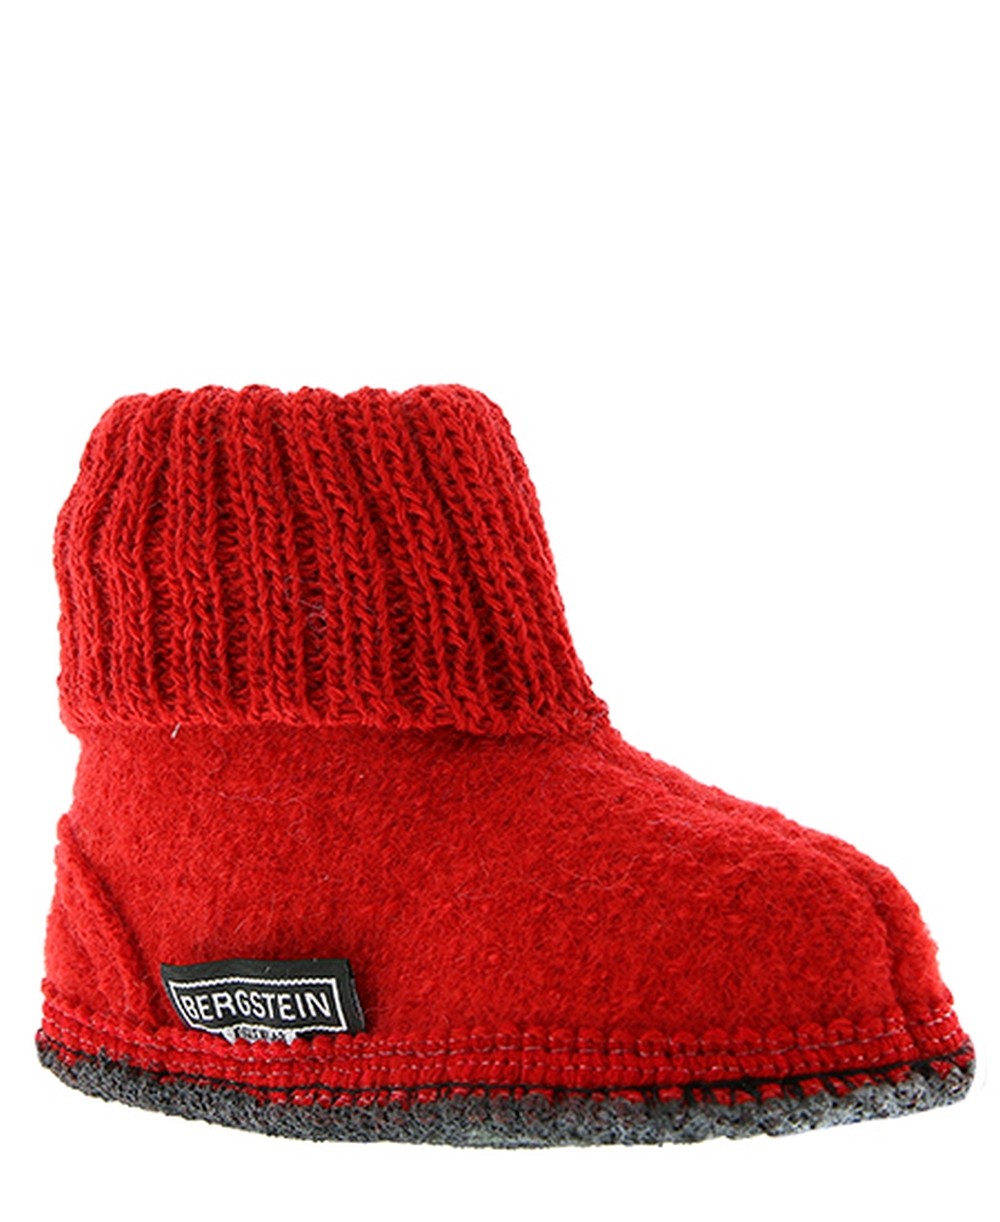 Cozy Red Wool